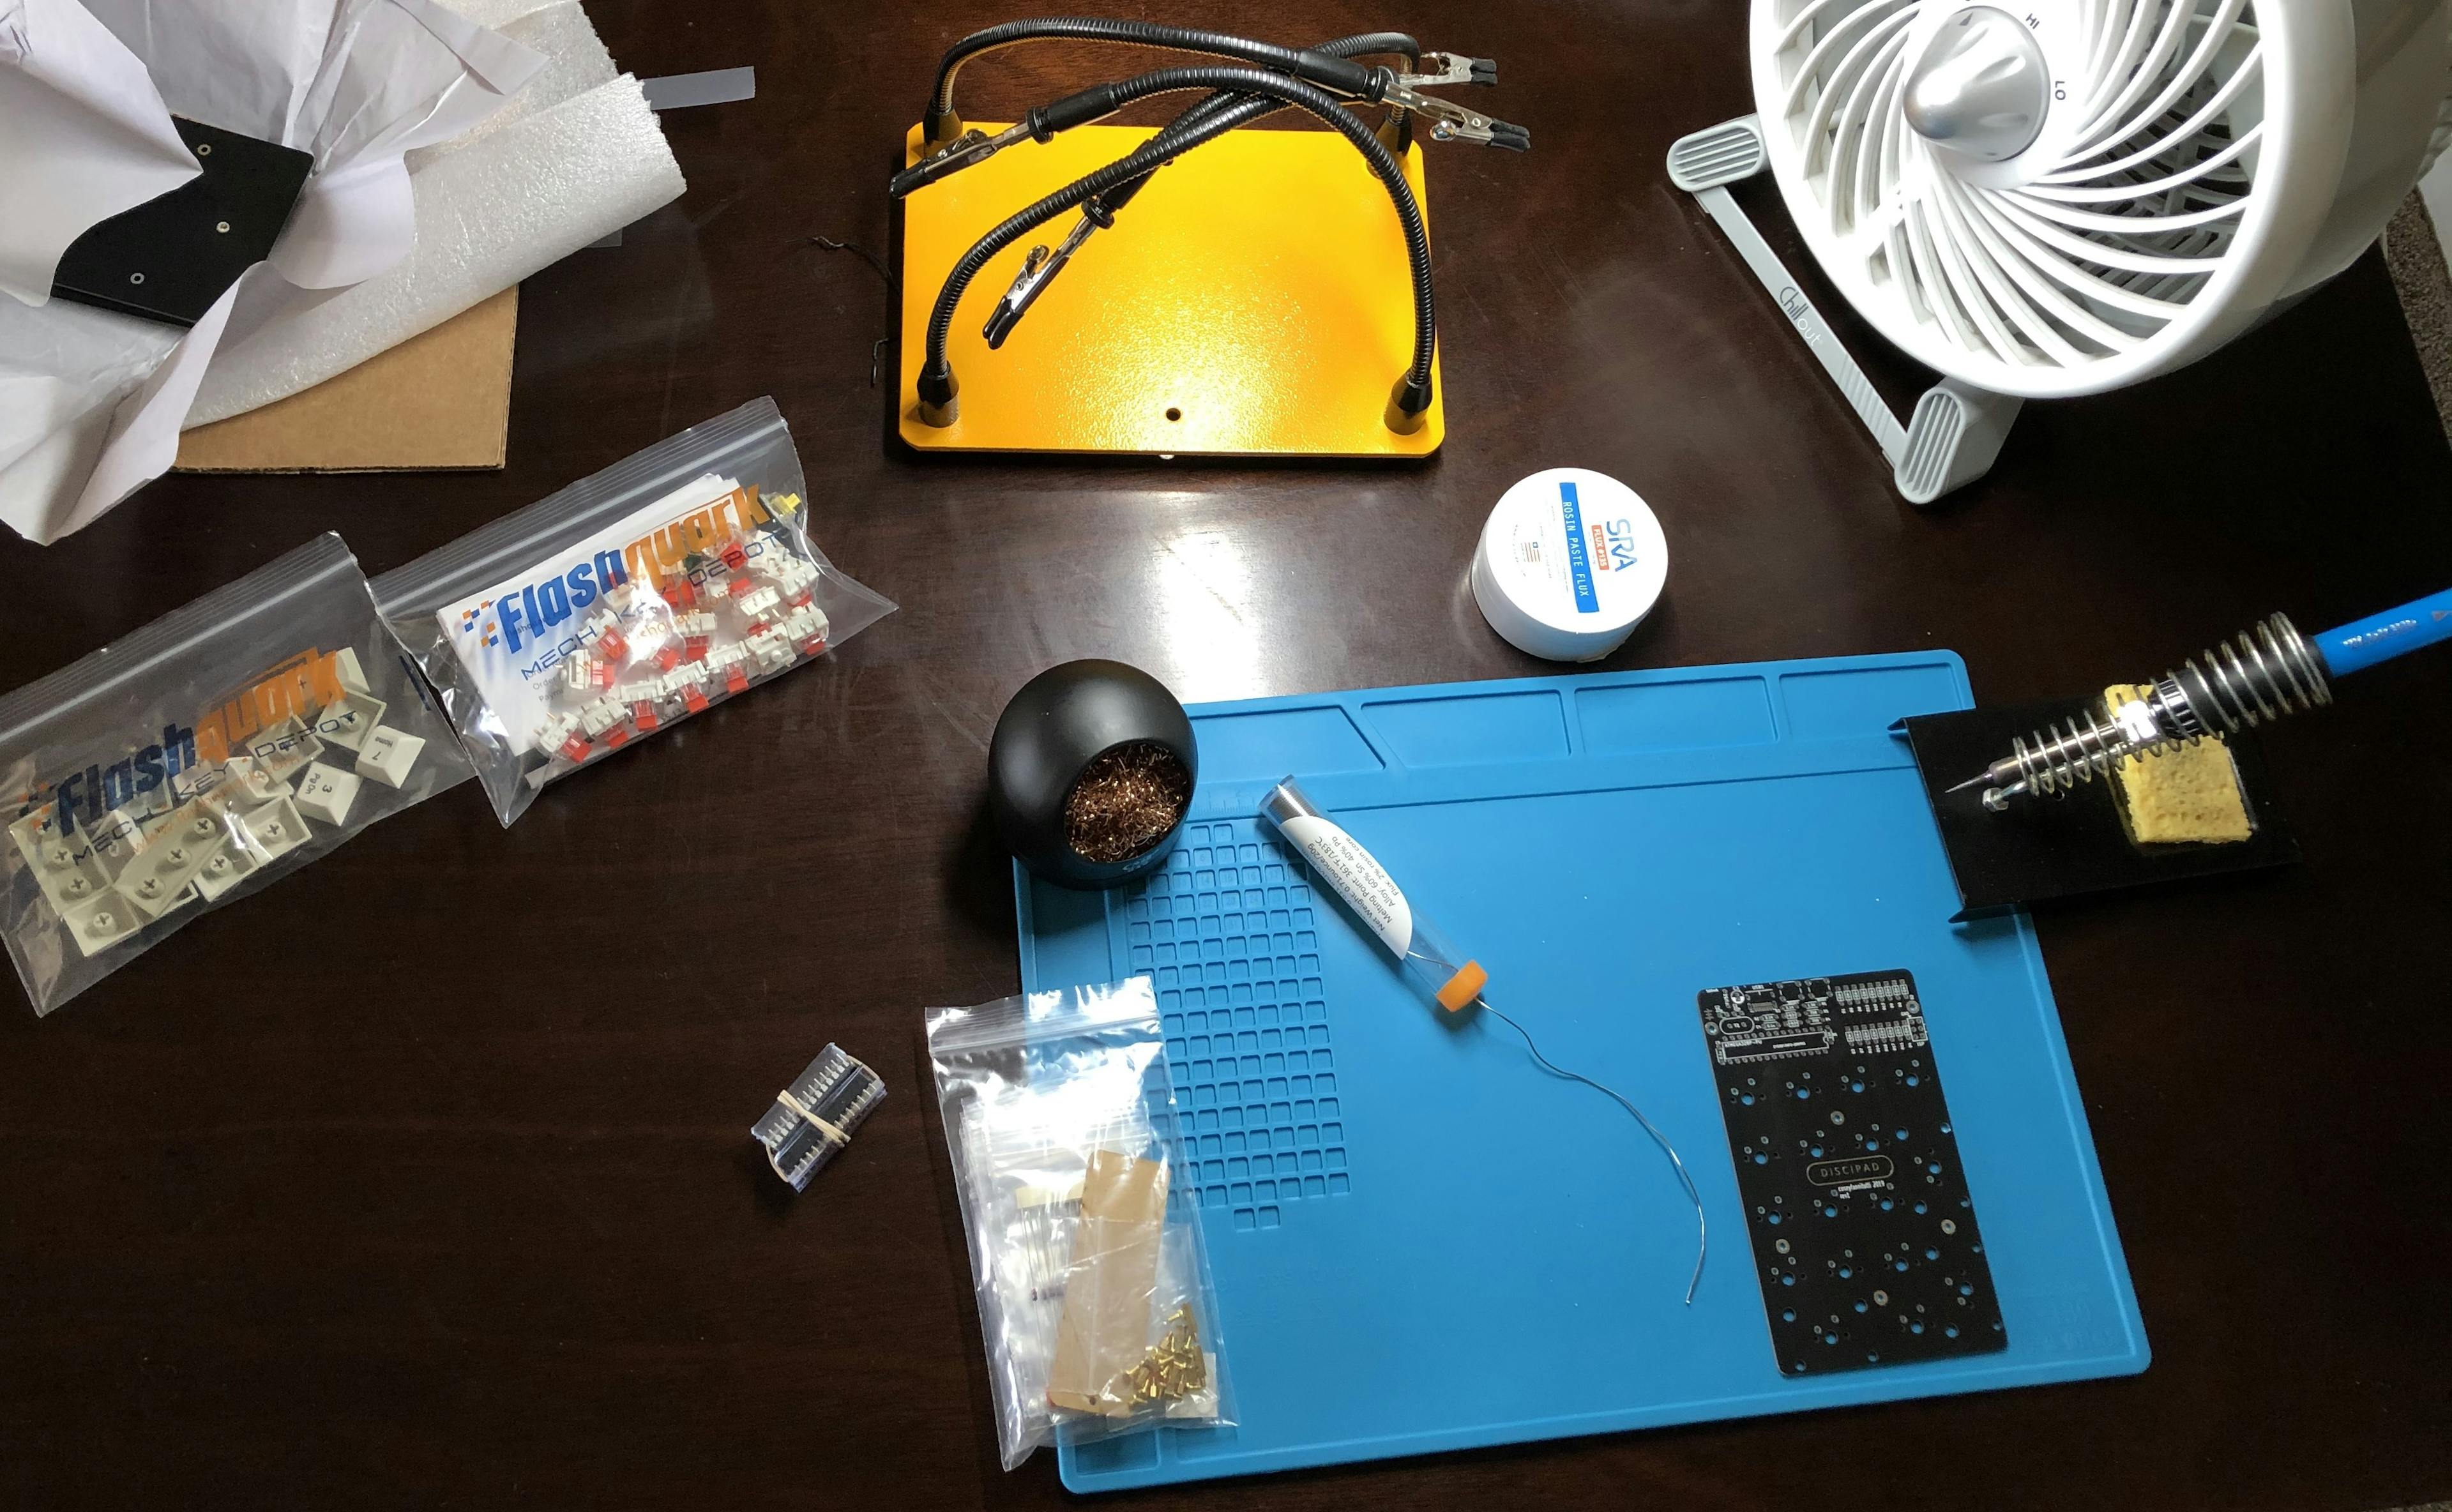 Soldering equipment, circuit boards, and keyboard parts